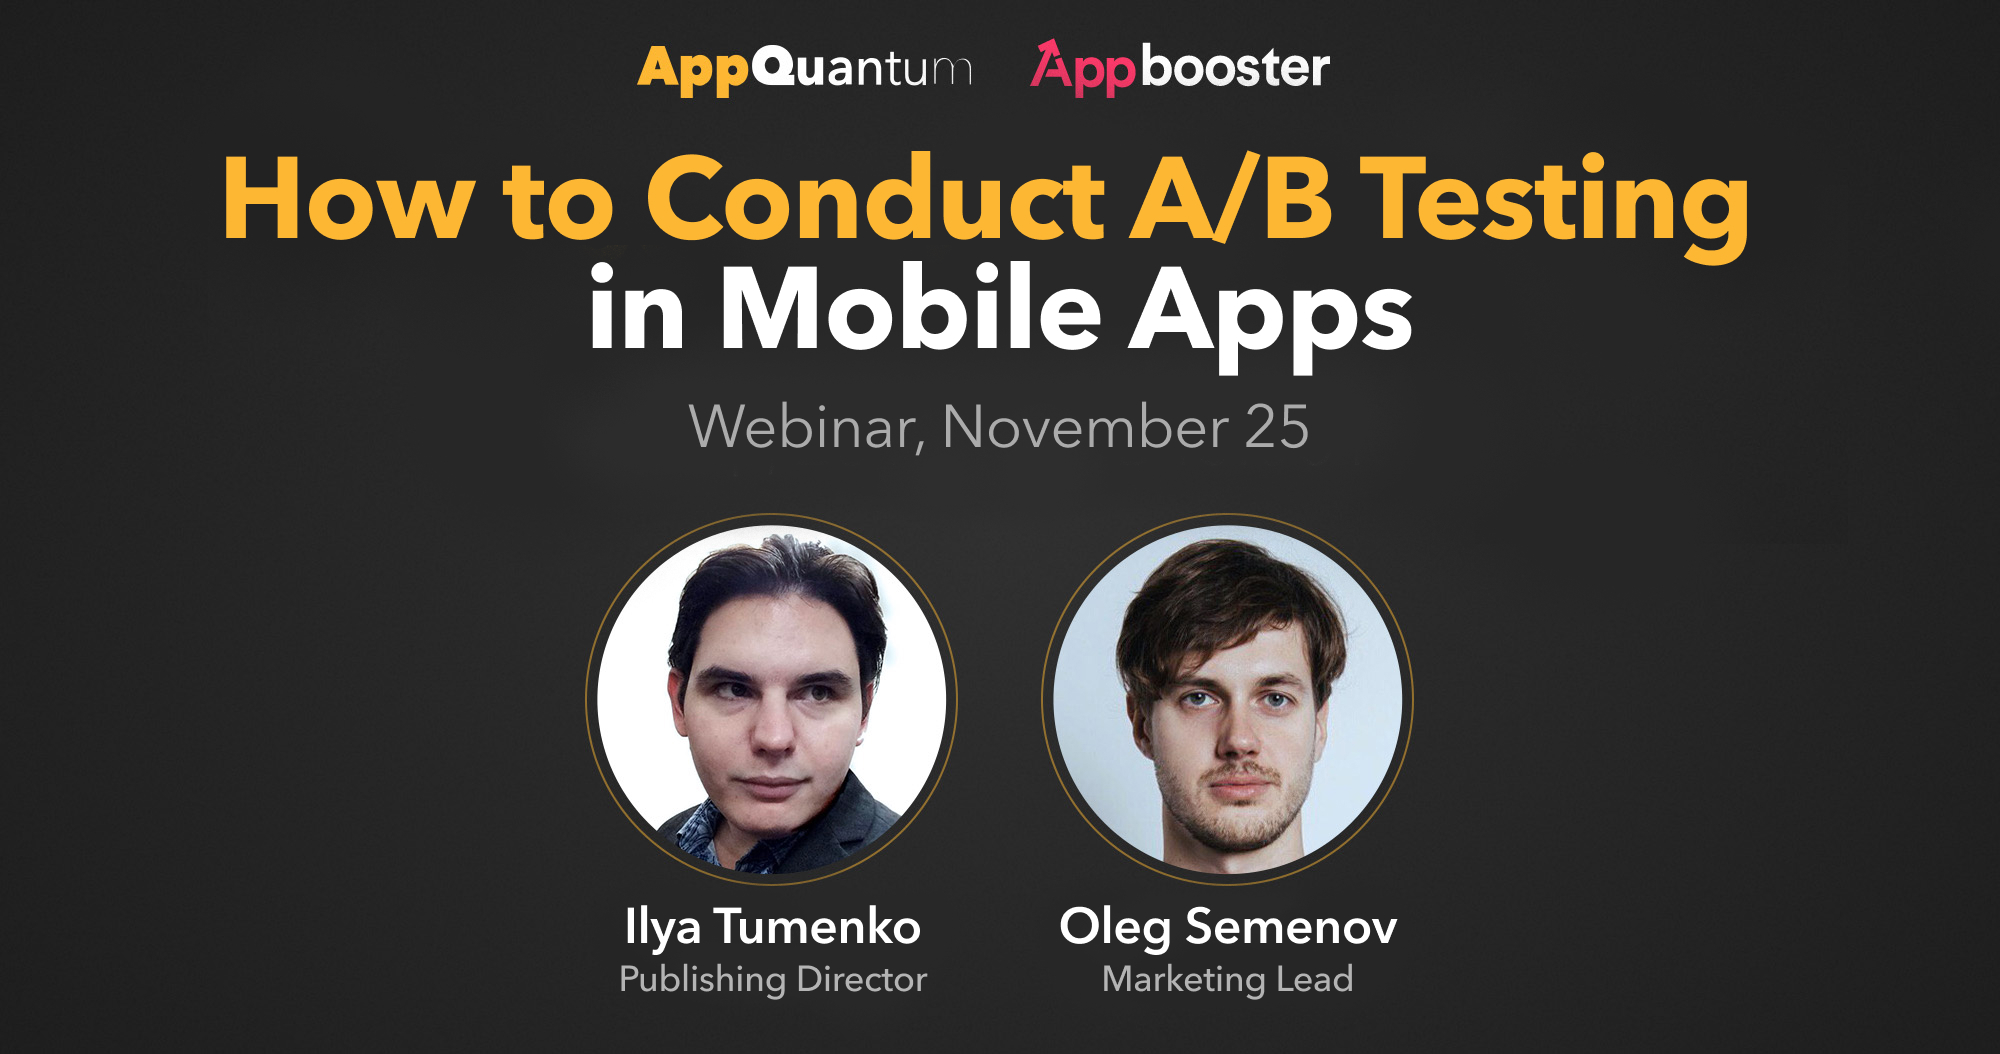 AppQuantum & AppBooster Will Hold Webinars About A/B Testing in Mobile Games 